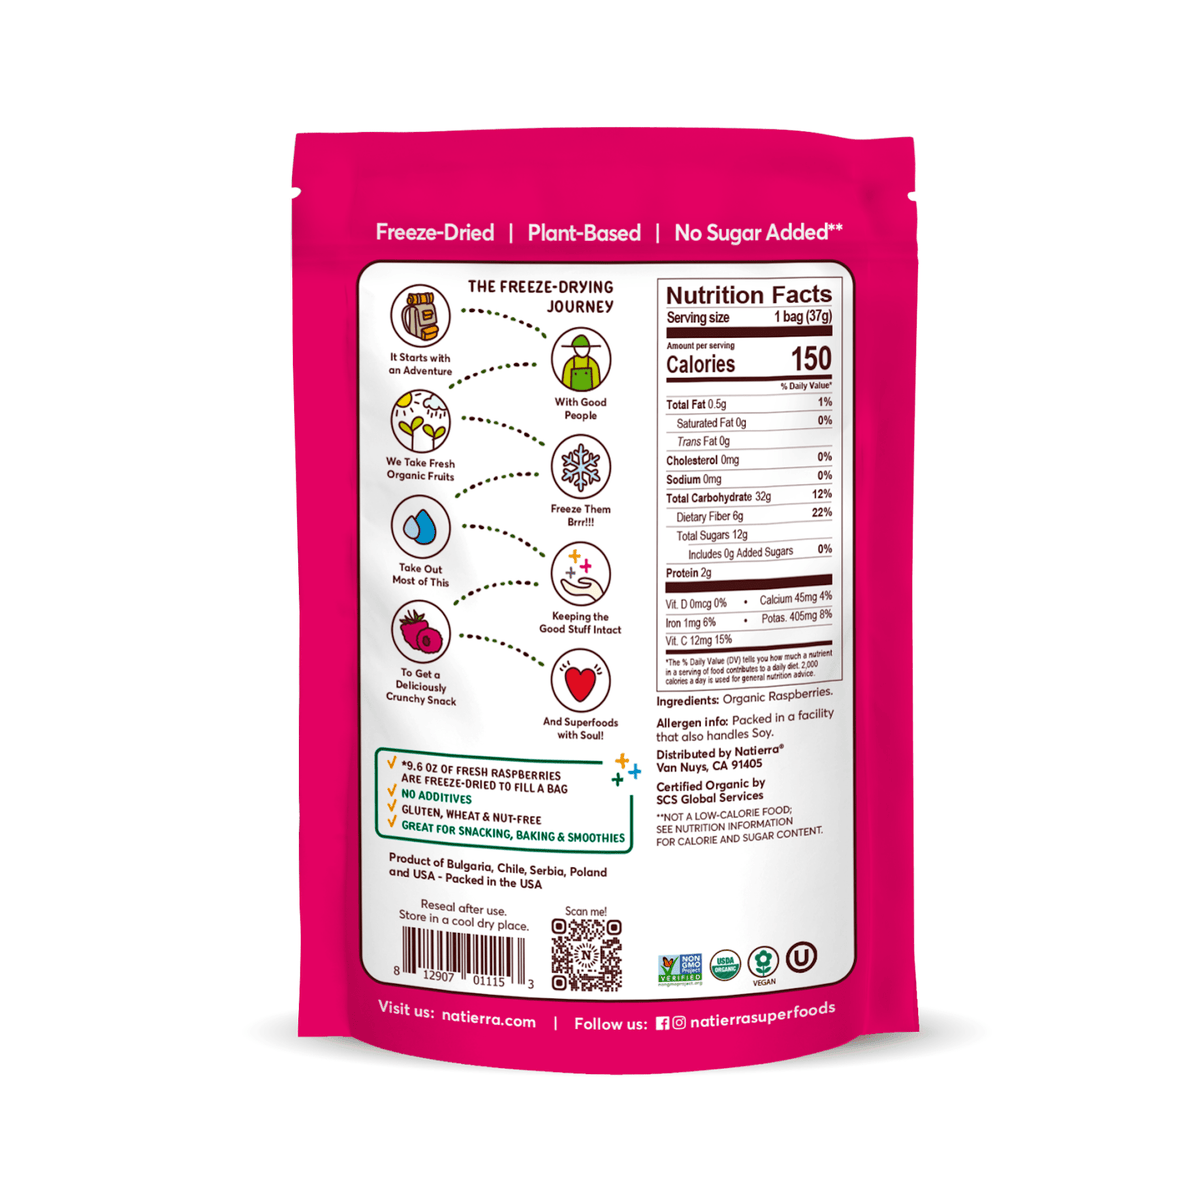 Natierra Organic Freeze-Dried Raspberries Nutrition facts, journey and main product claims